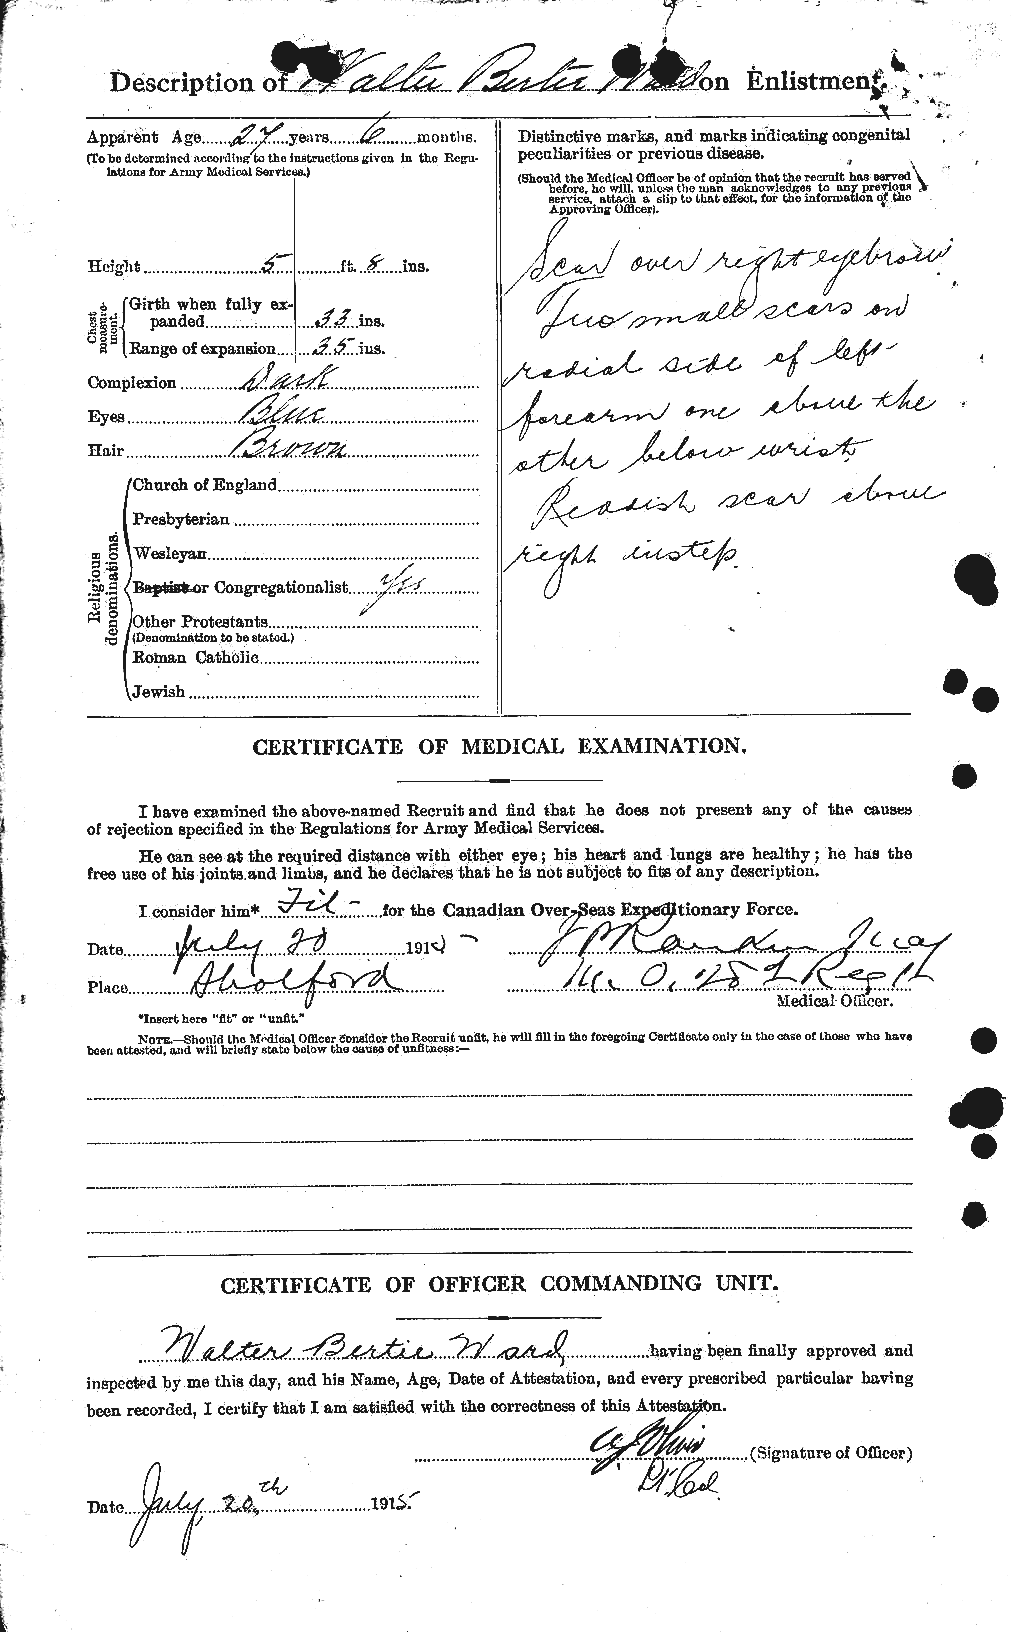 Personnel Records of the First World War - CEF 659755b